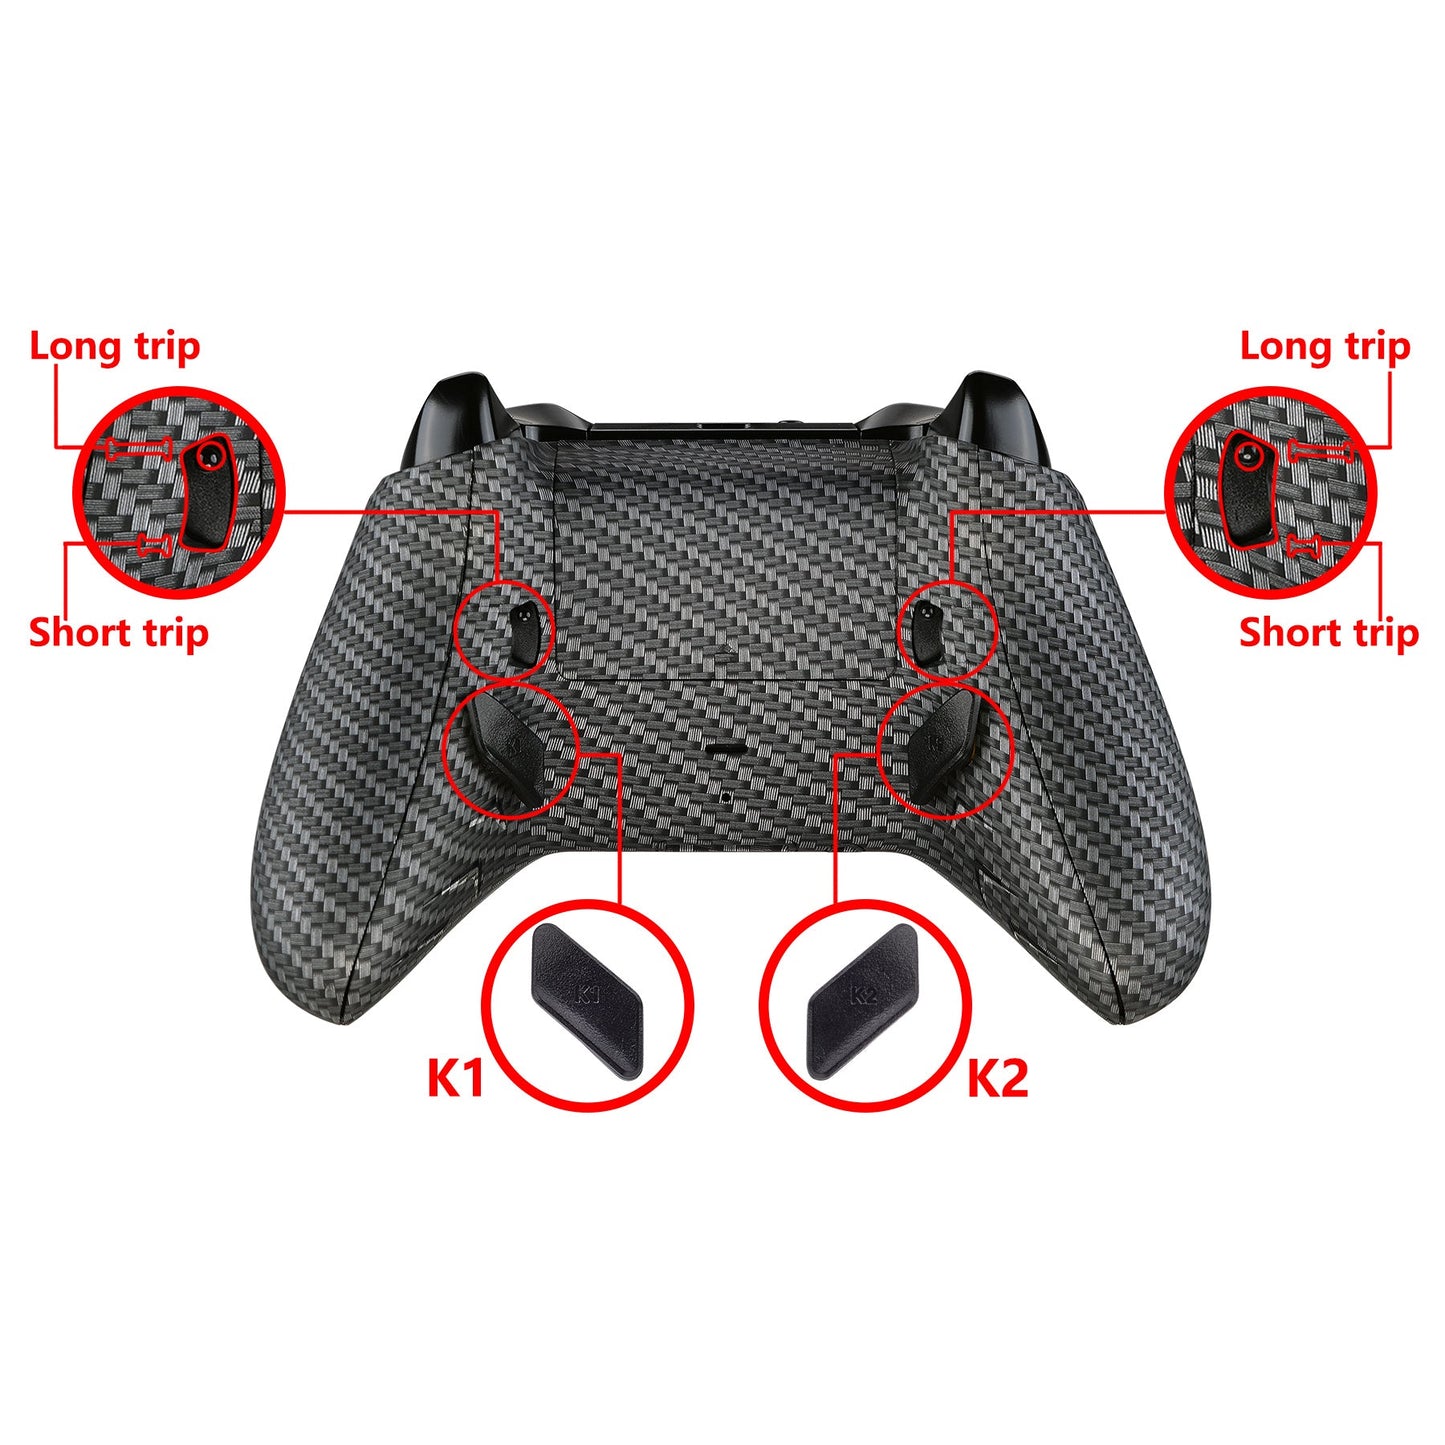 eXtremeRate Retail Lofty Remappable Remap & Trigger Stop Kit, Redesigned Back Shell & Side Rails & Back Buttons & Trigger Lock for Xbox One S X Controller 1708 - Black Silver Carbon Fiber - X1RM007